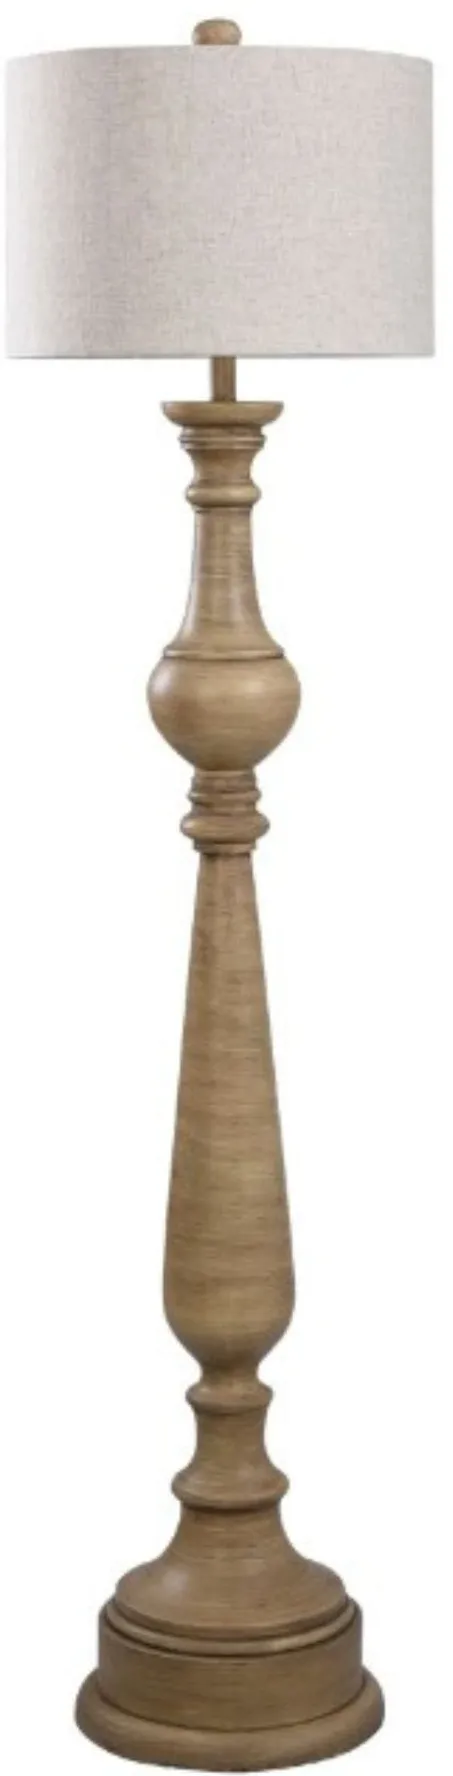 Taupe Turned Floor Lamp 65.5"H